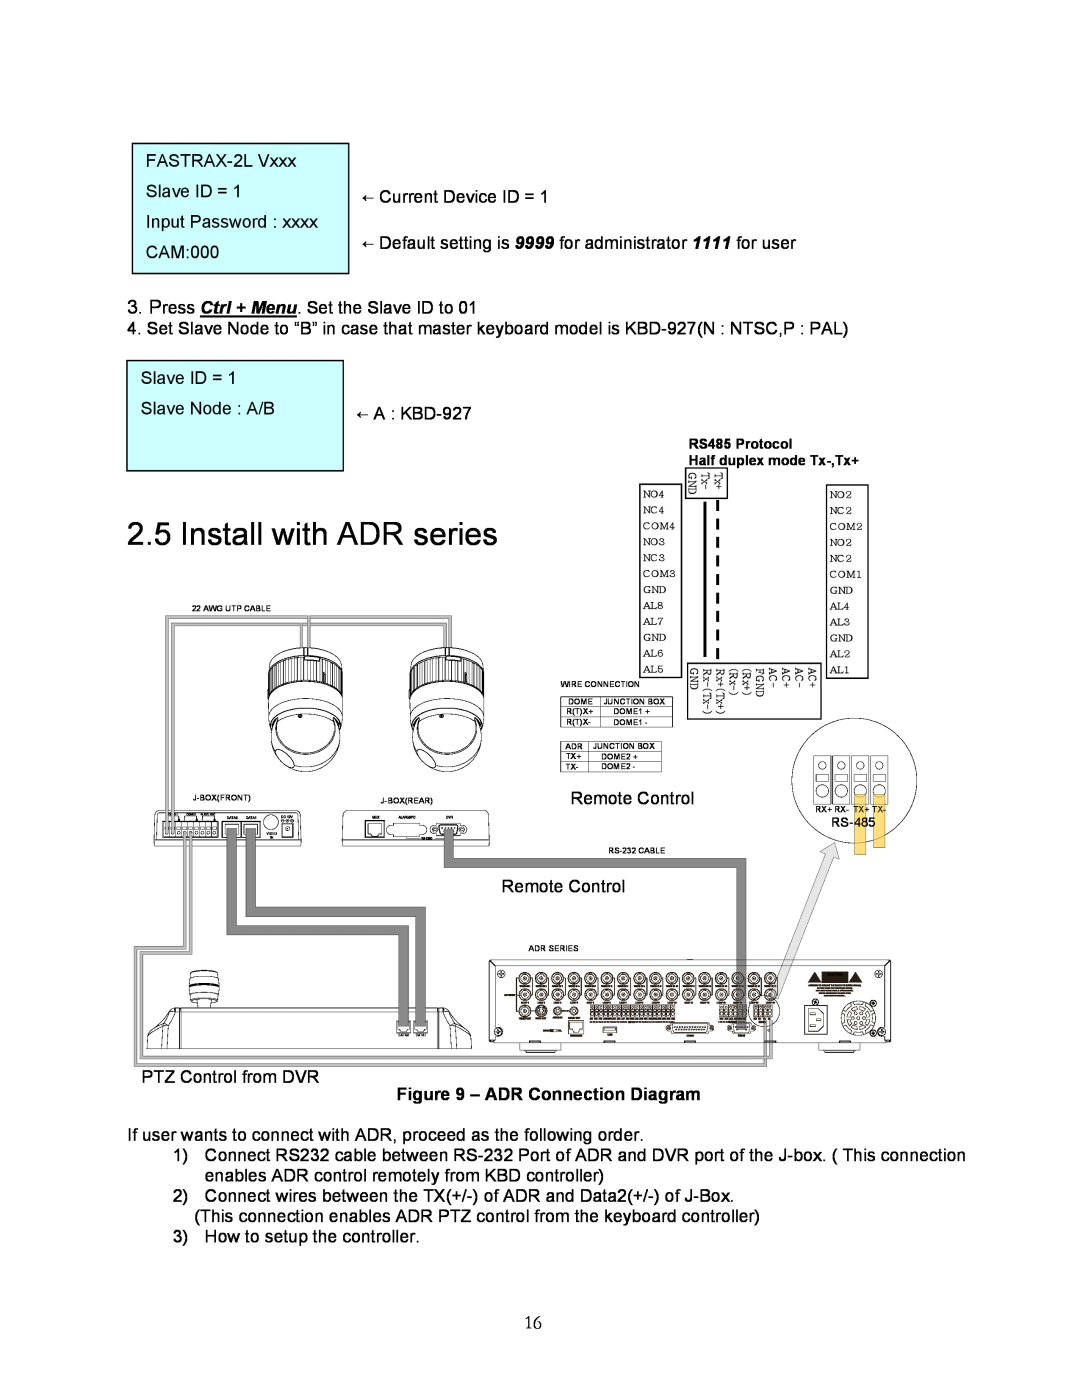 Speco Technologies KBD-927 instruction manual Install with ADR series 